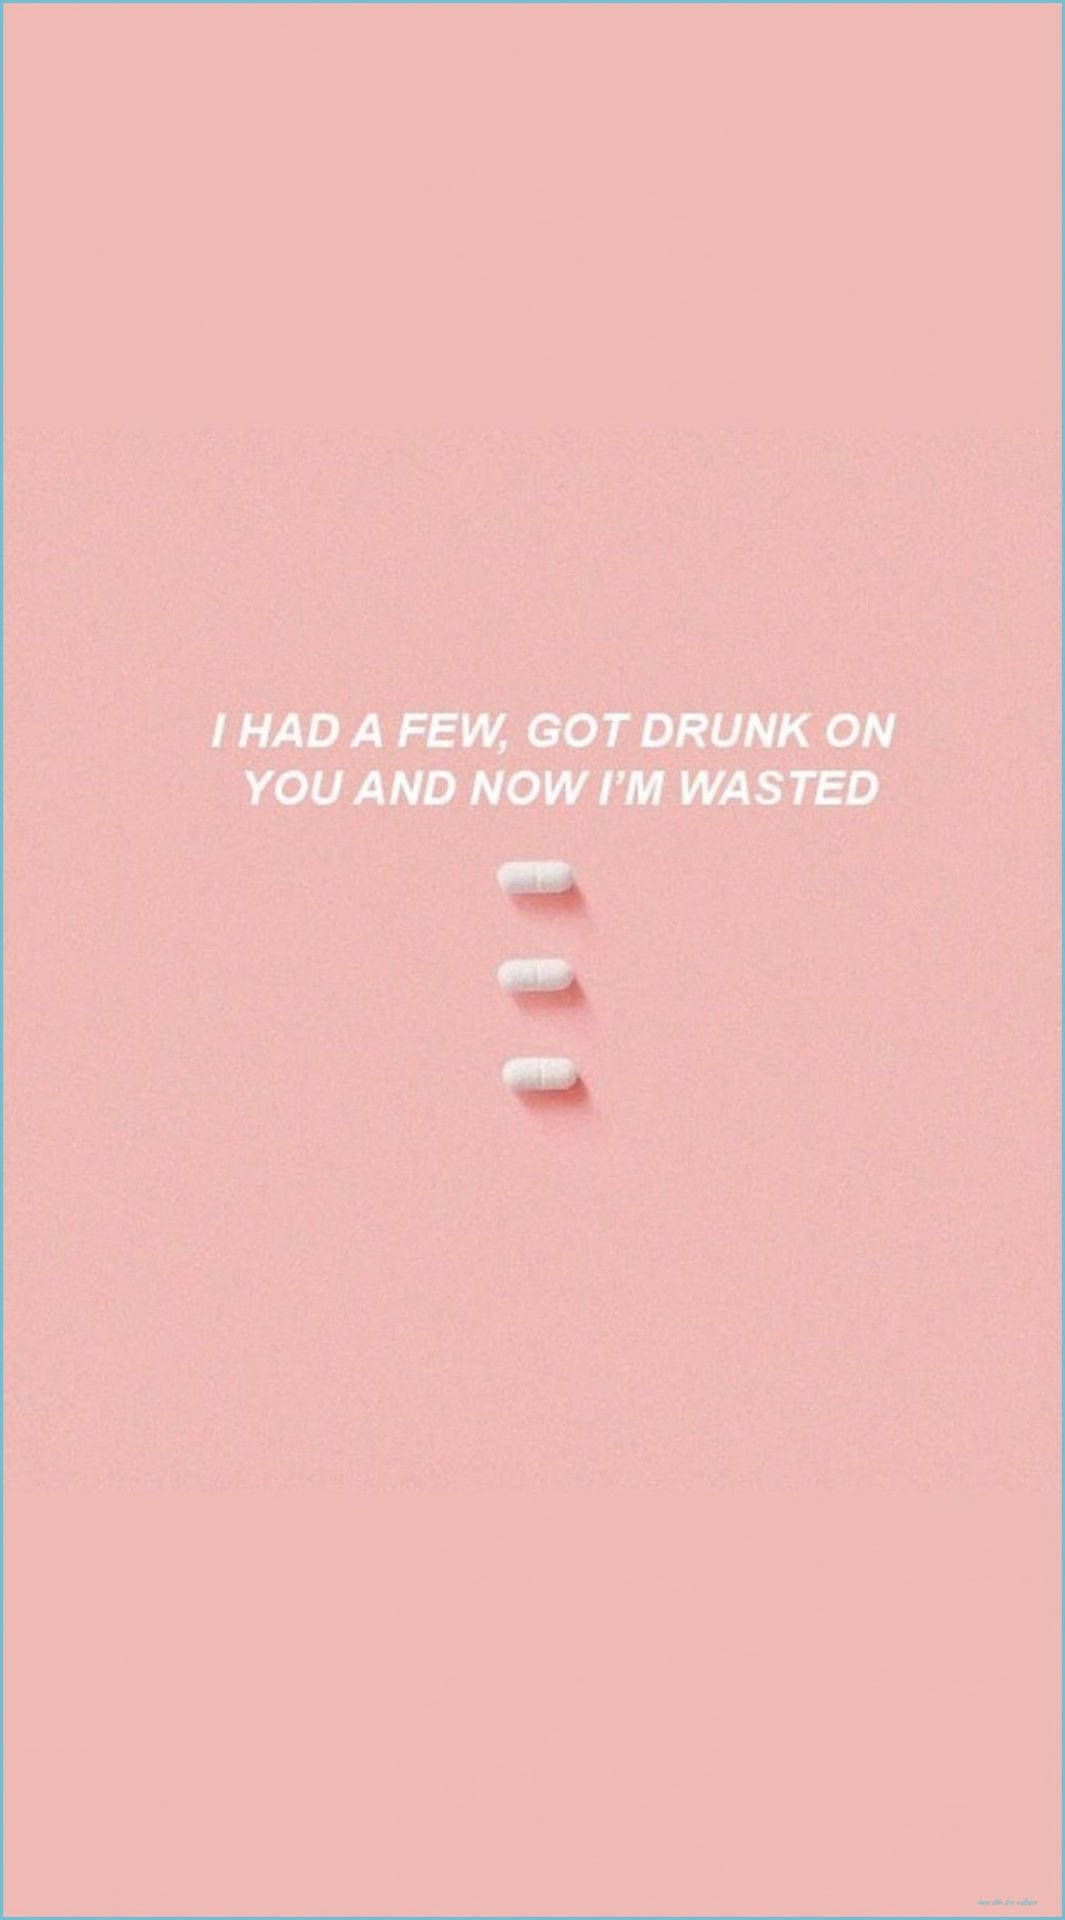 I have a few pills on you now and it's wasted - Harry Styles